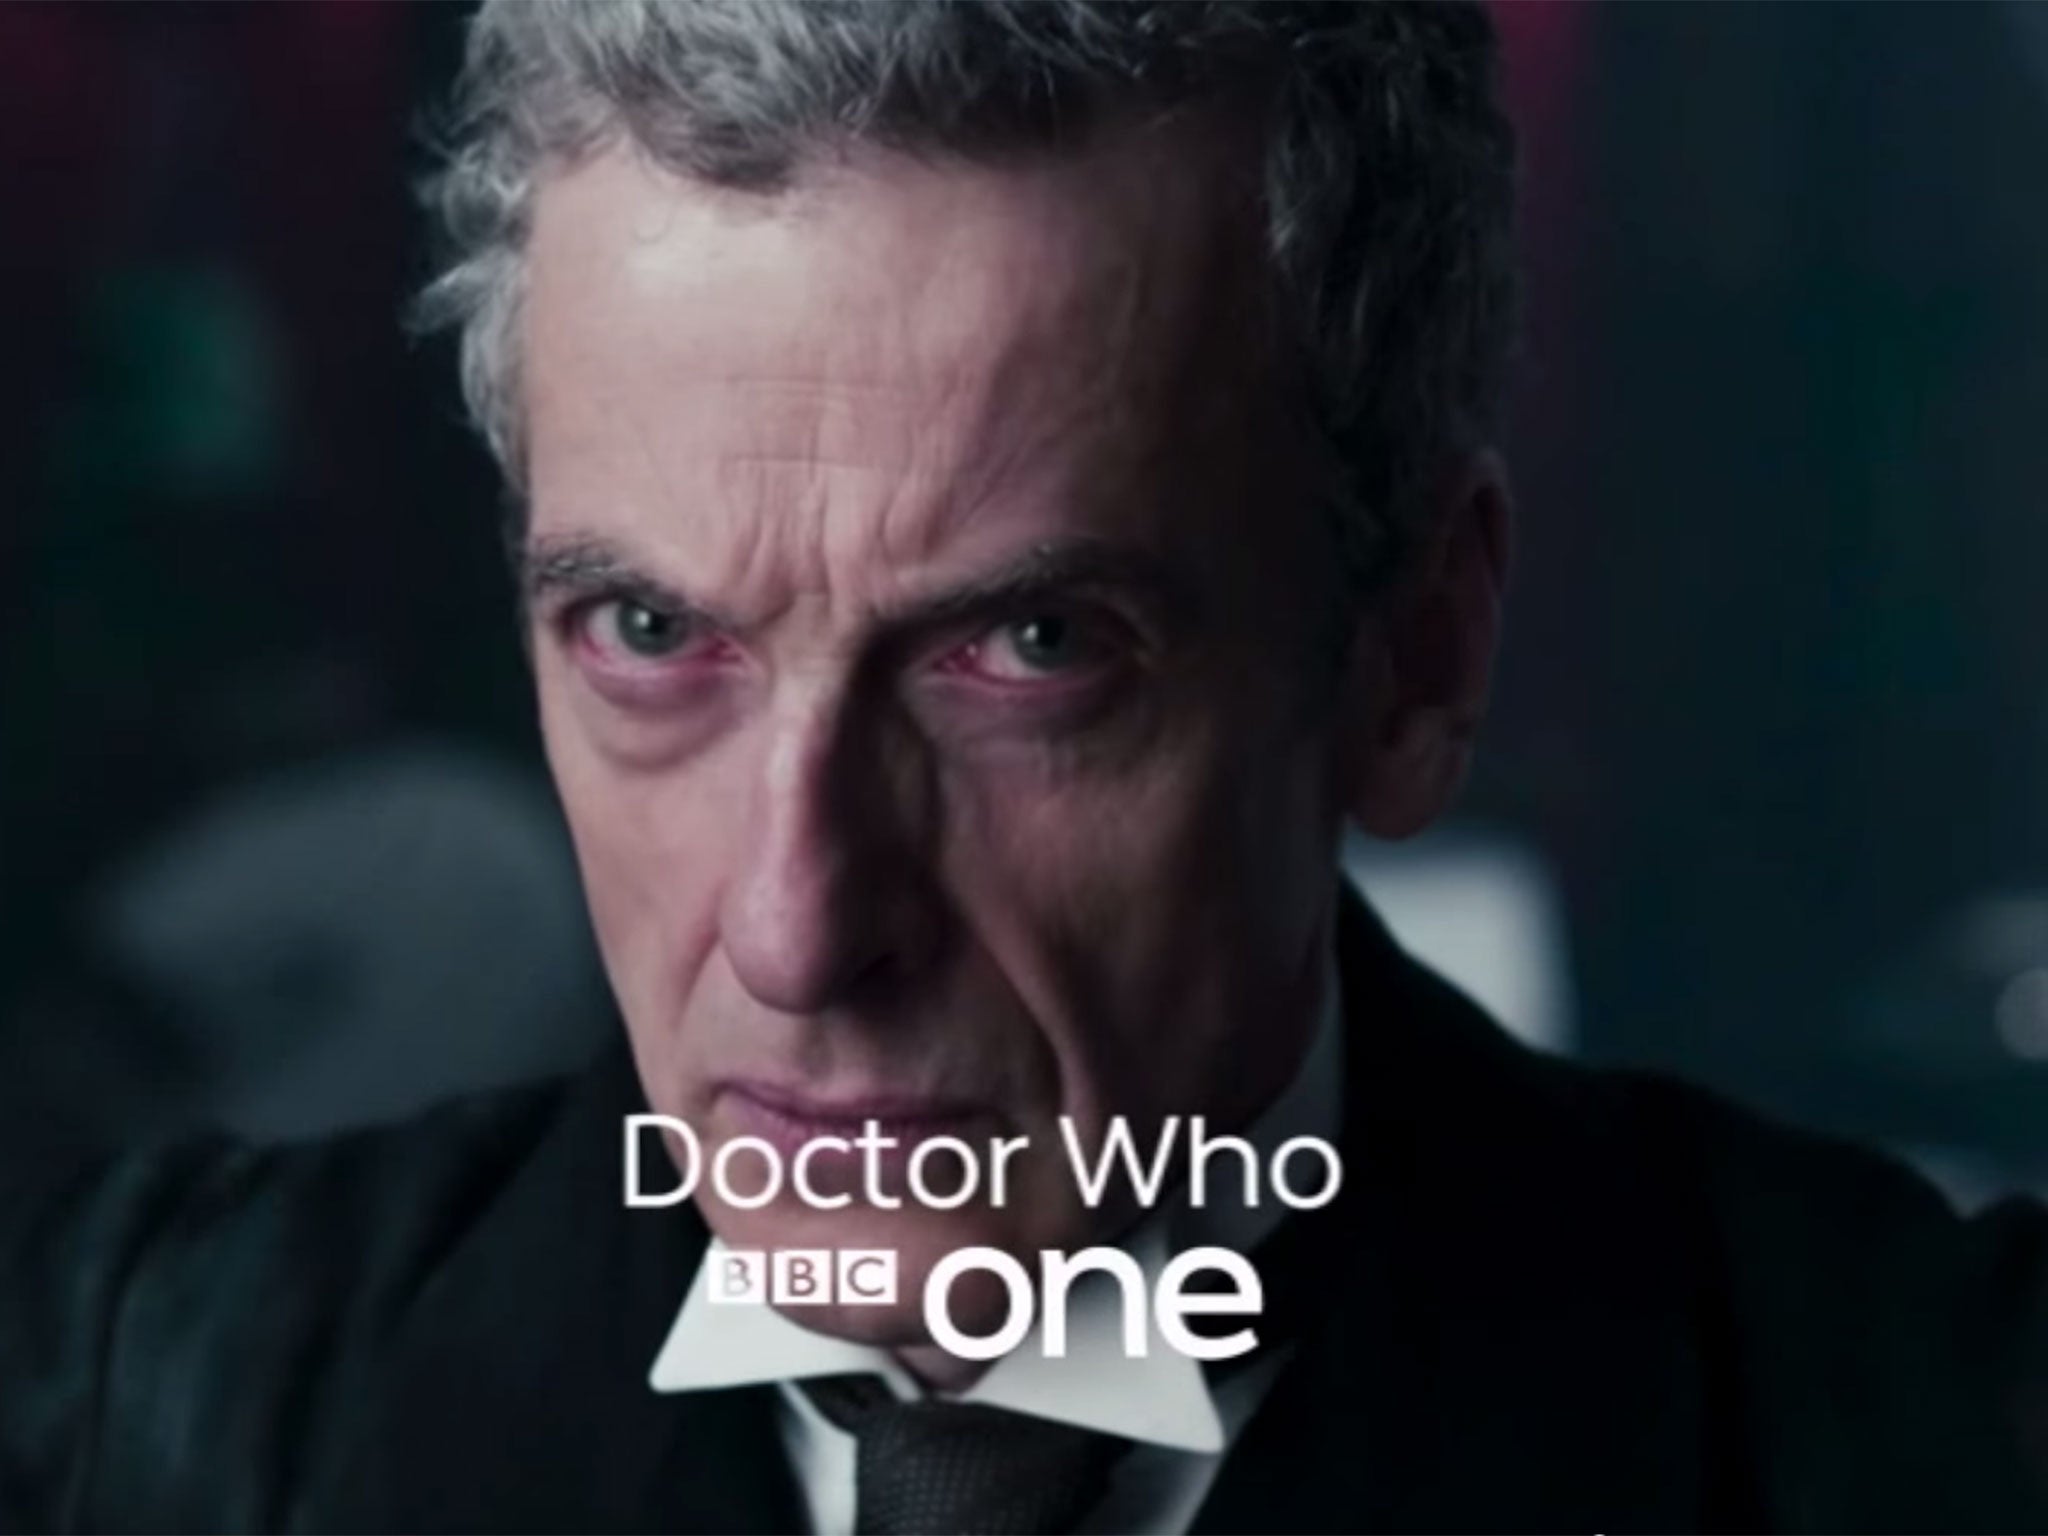 Peter Capaldi returns for more Doctor Who